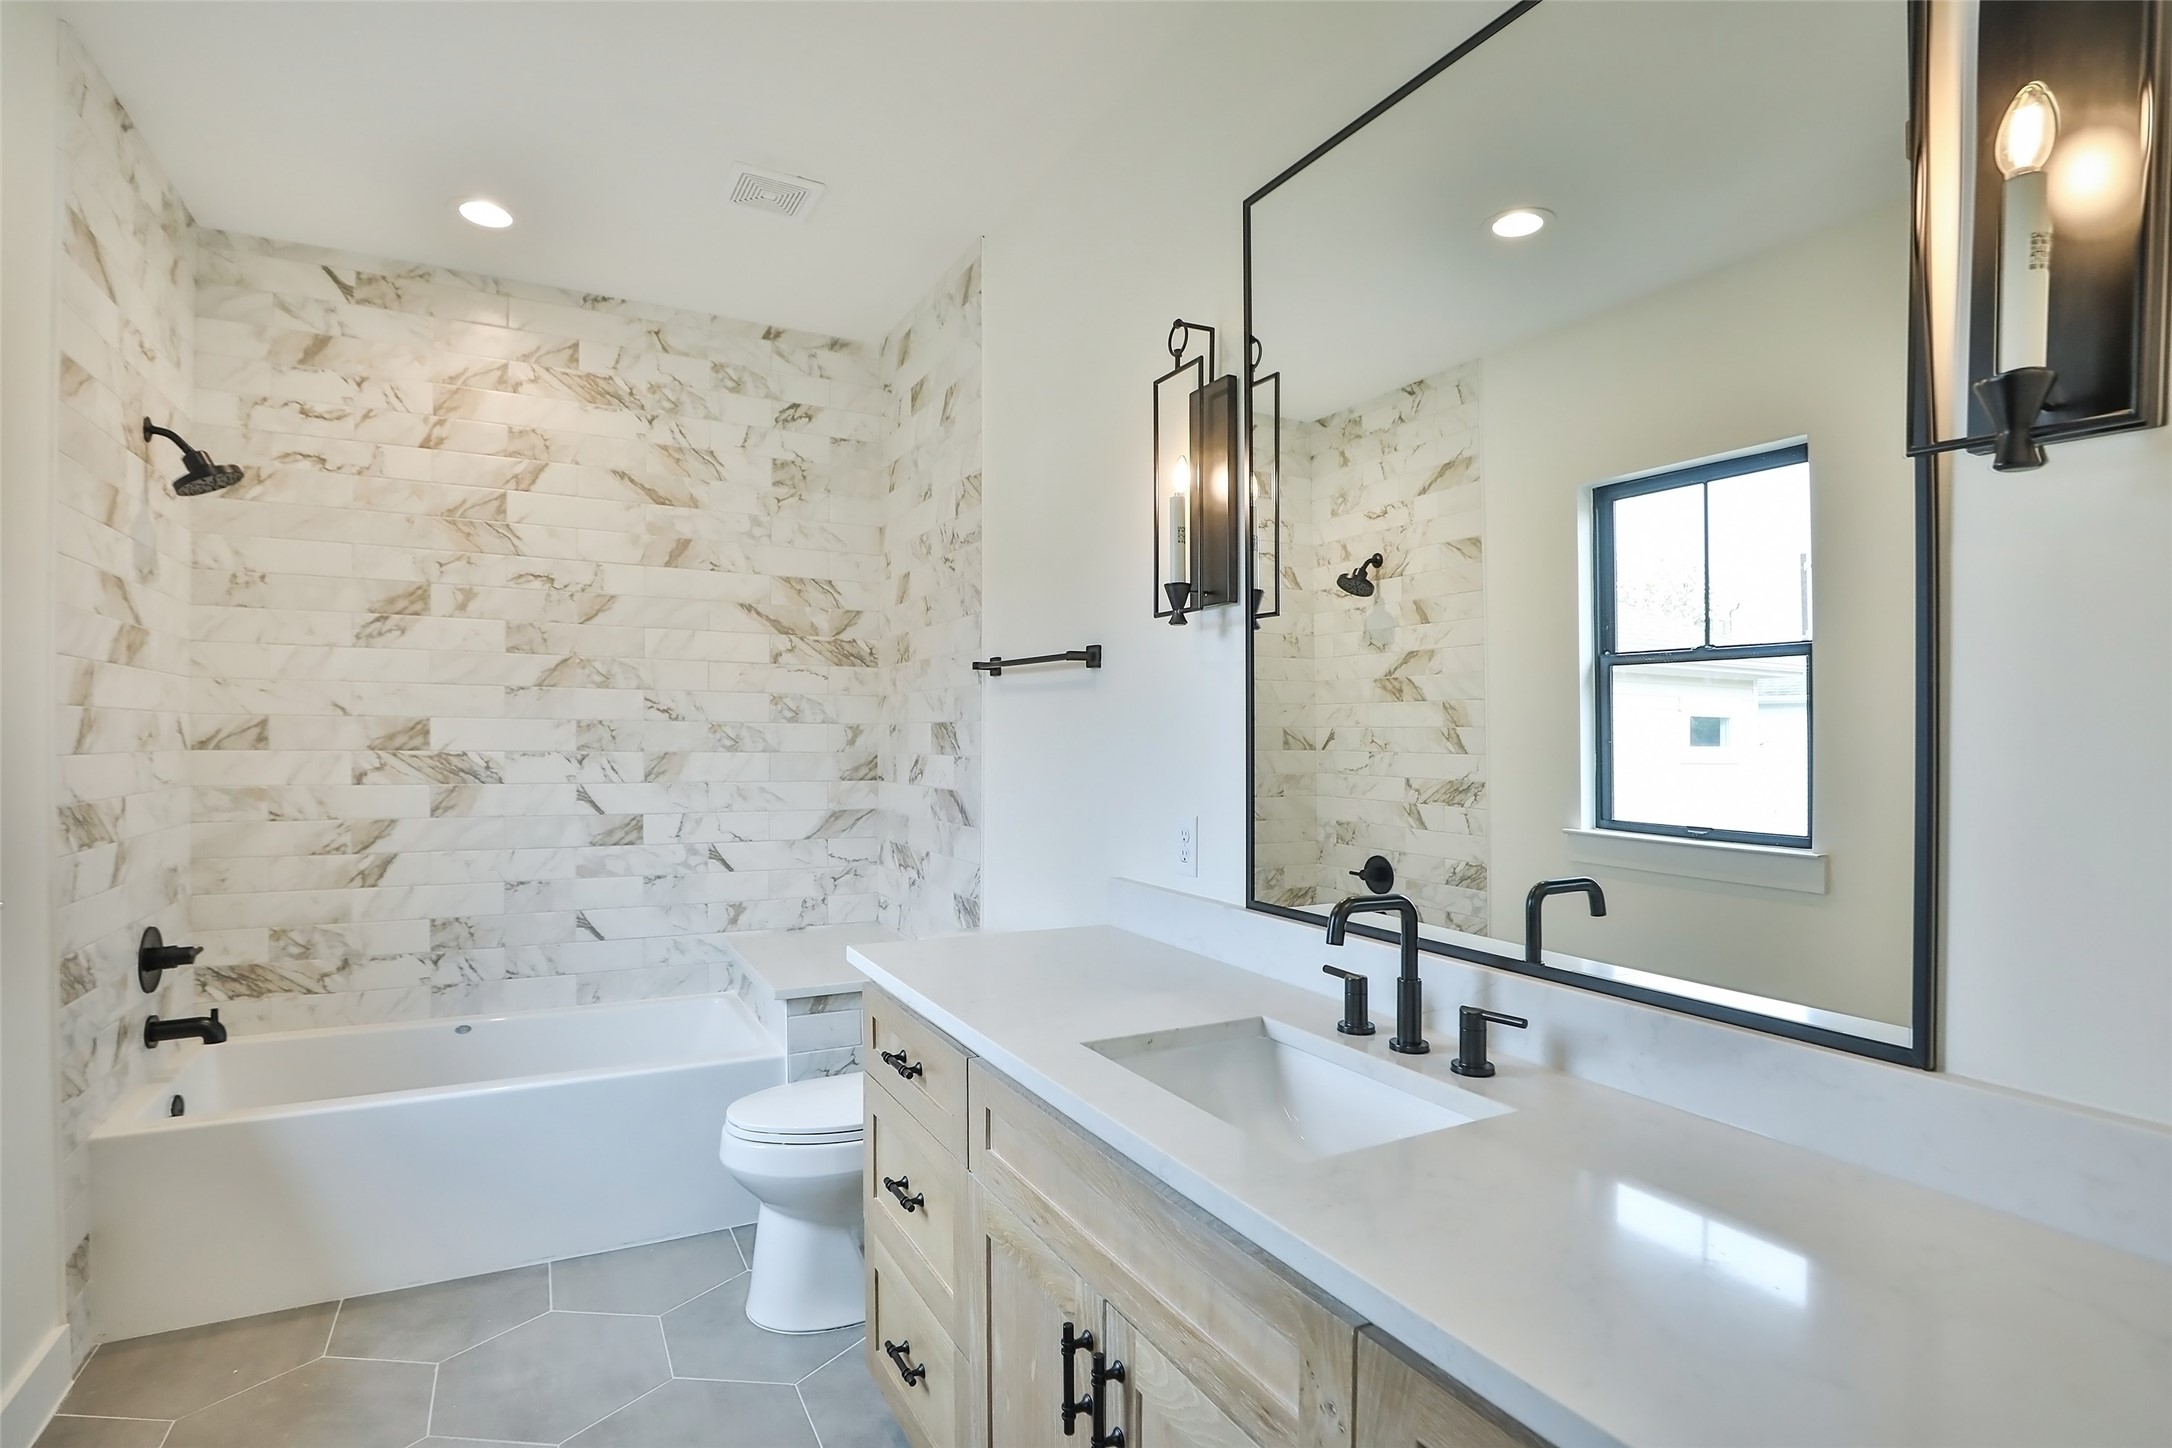 This full bathroom is located on the second floor in the back of the home adjacent to the large room.